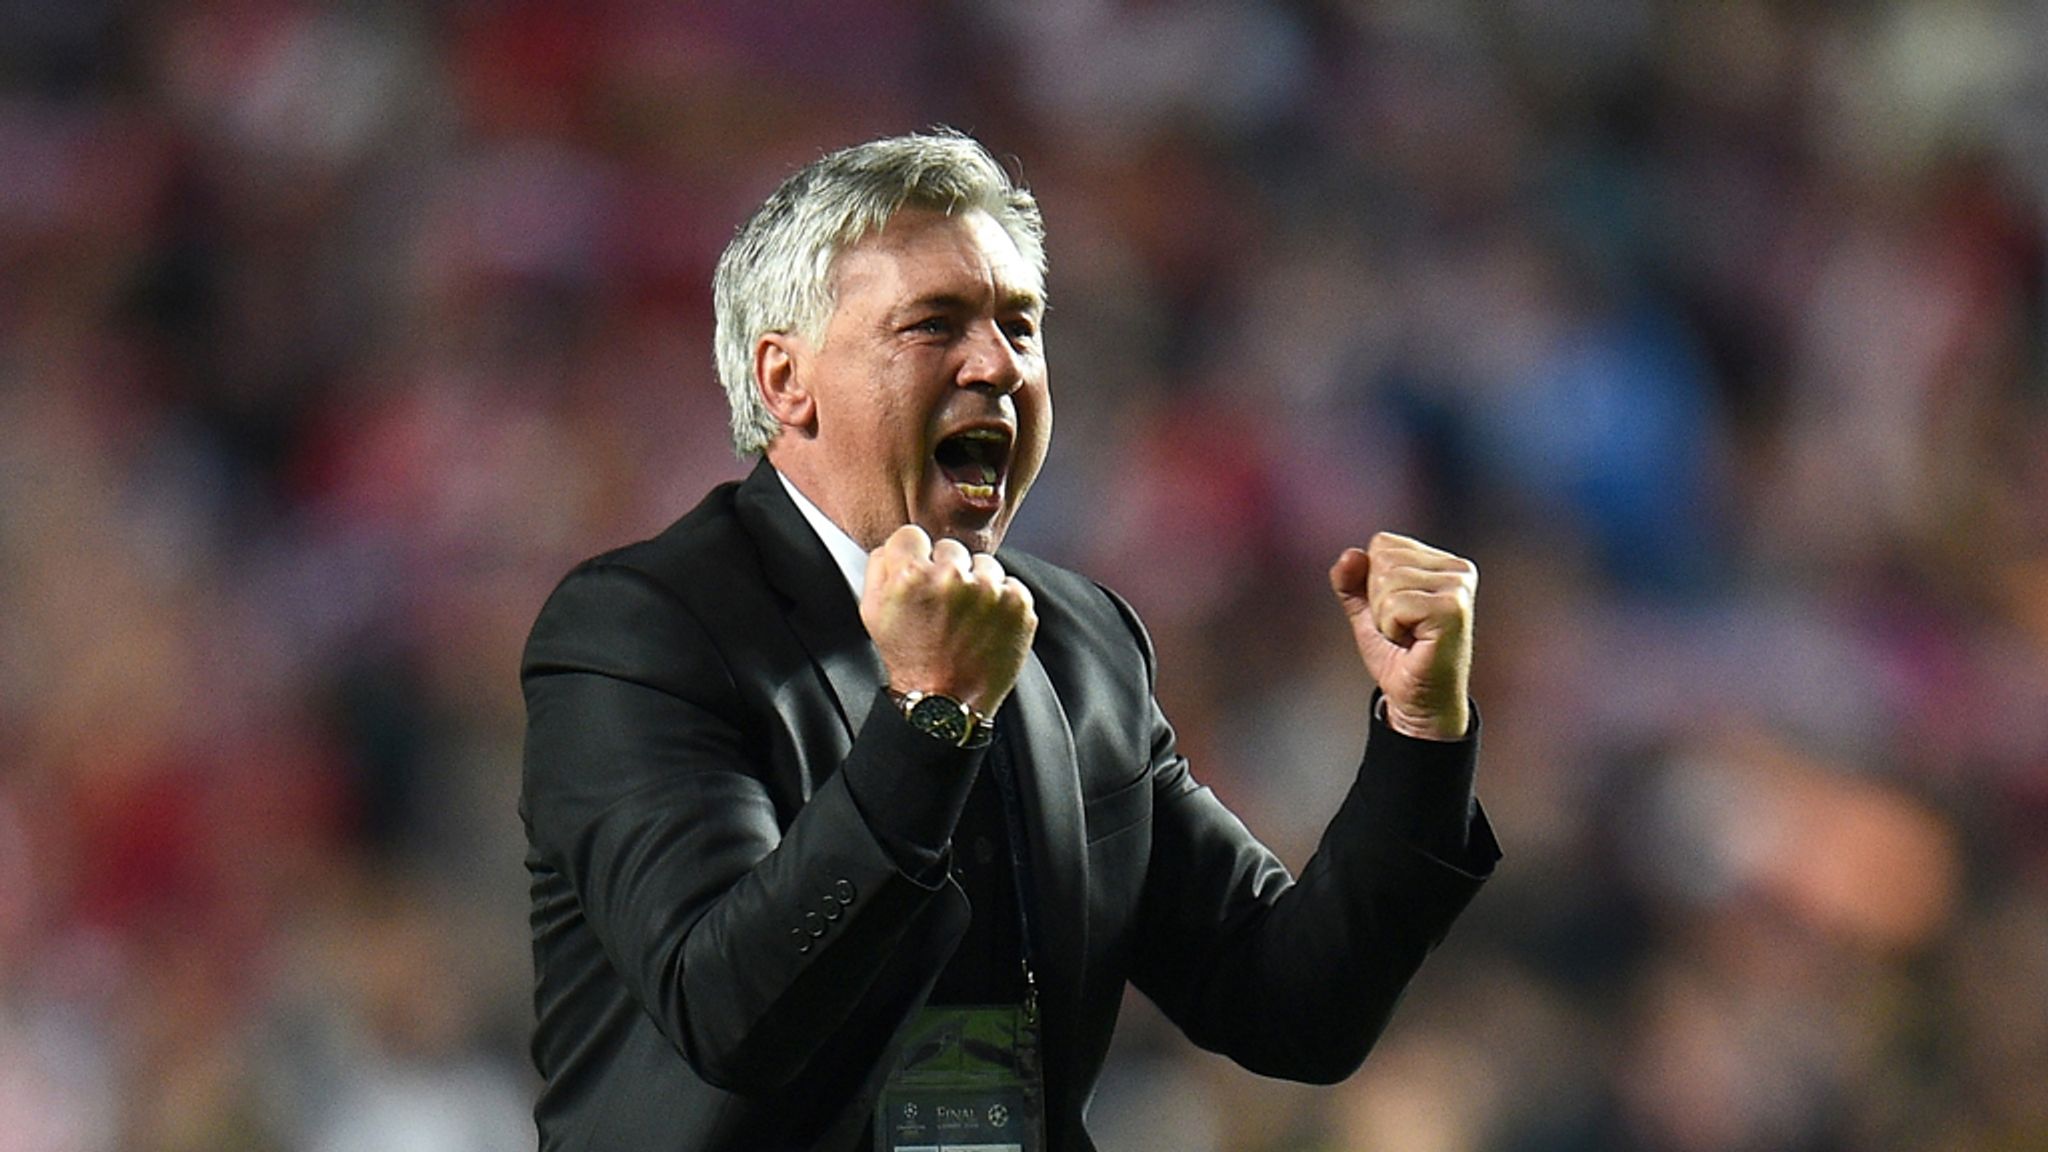 Real Madrid Manager Carlo Ancelotti - 'The atmosphere around